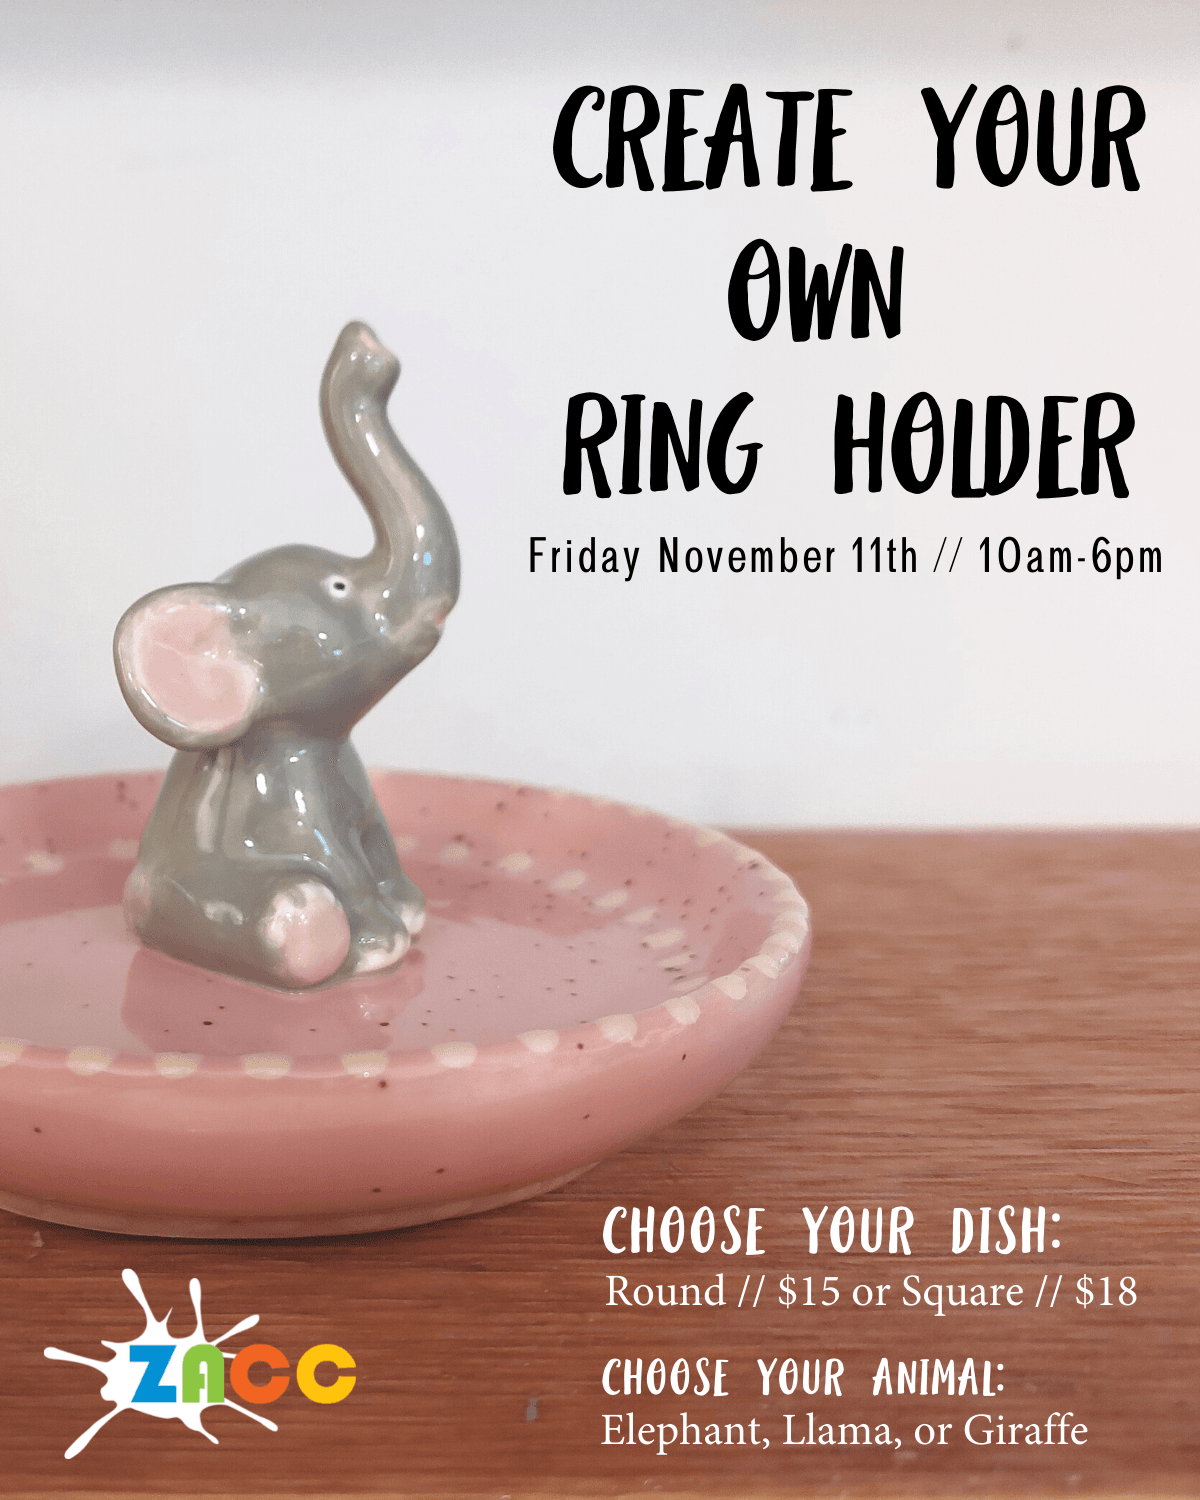 This image showcases an employee example of a custom created paint your own pottery ring holder. The ring holder is a small round ceramic plate, painted pink with white dots along the rim. An elephant sits in the center of the plate, trunk raised, ready t